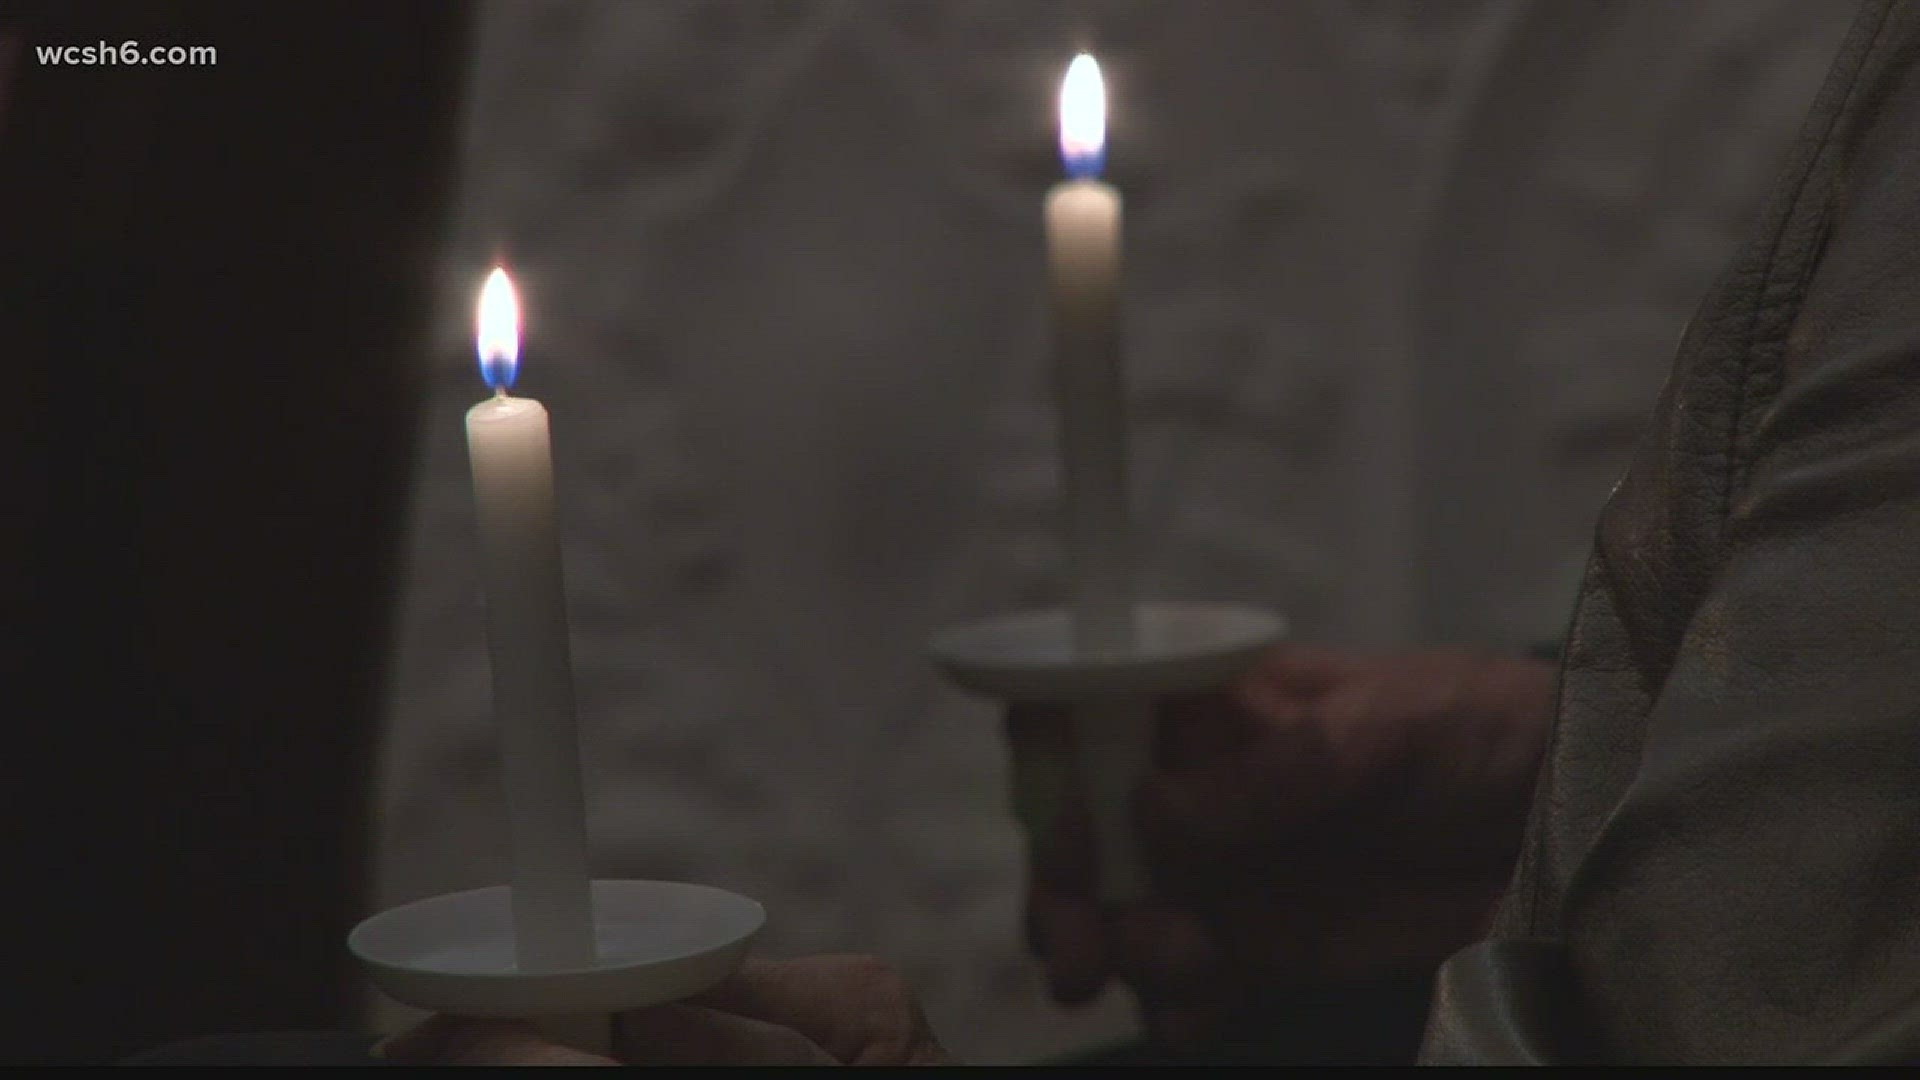 Prayer vigil held for those lost to substance abuse